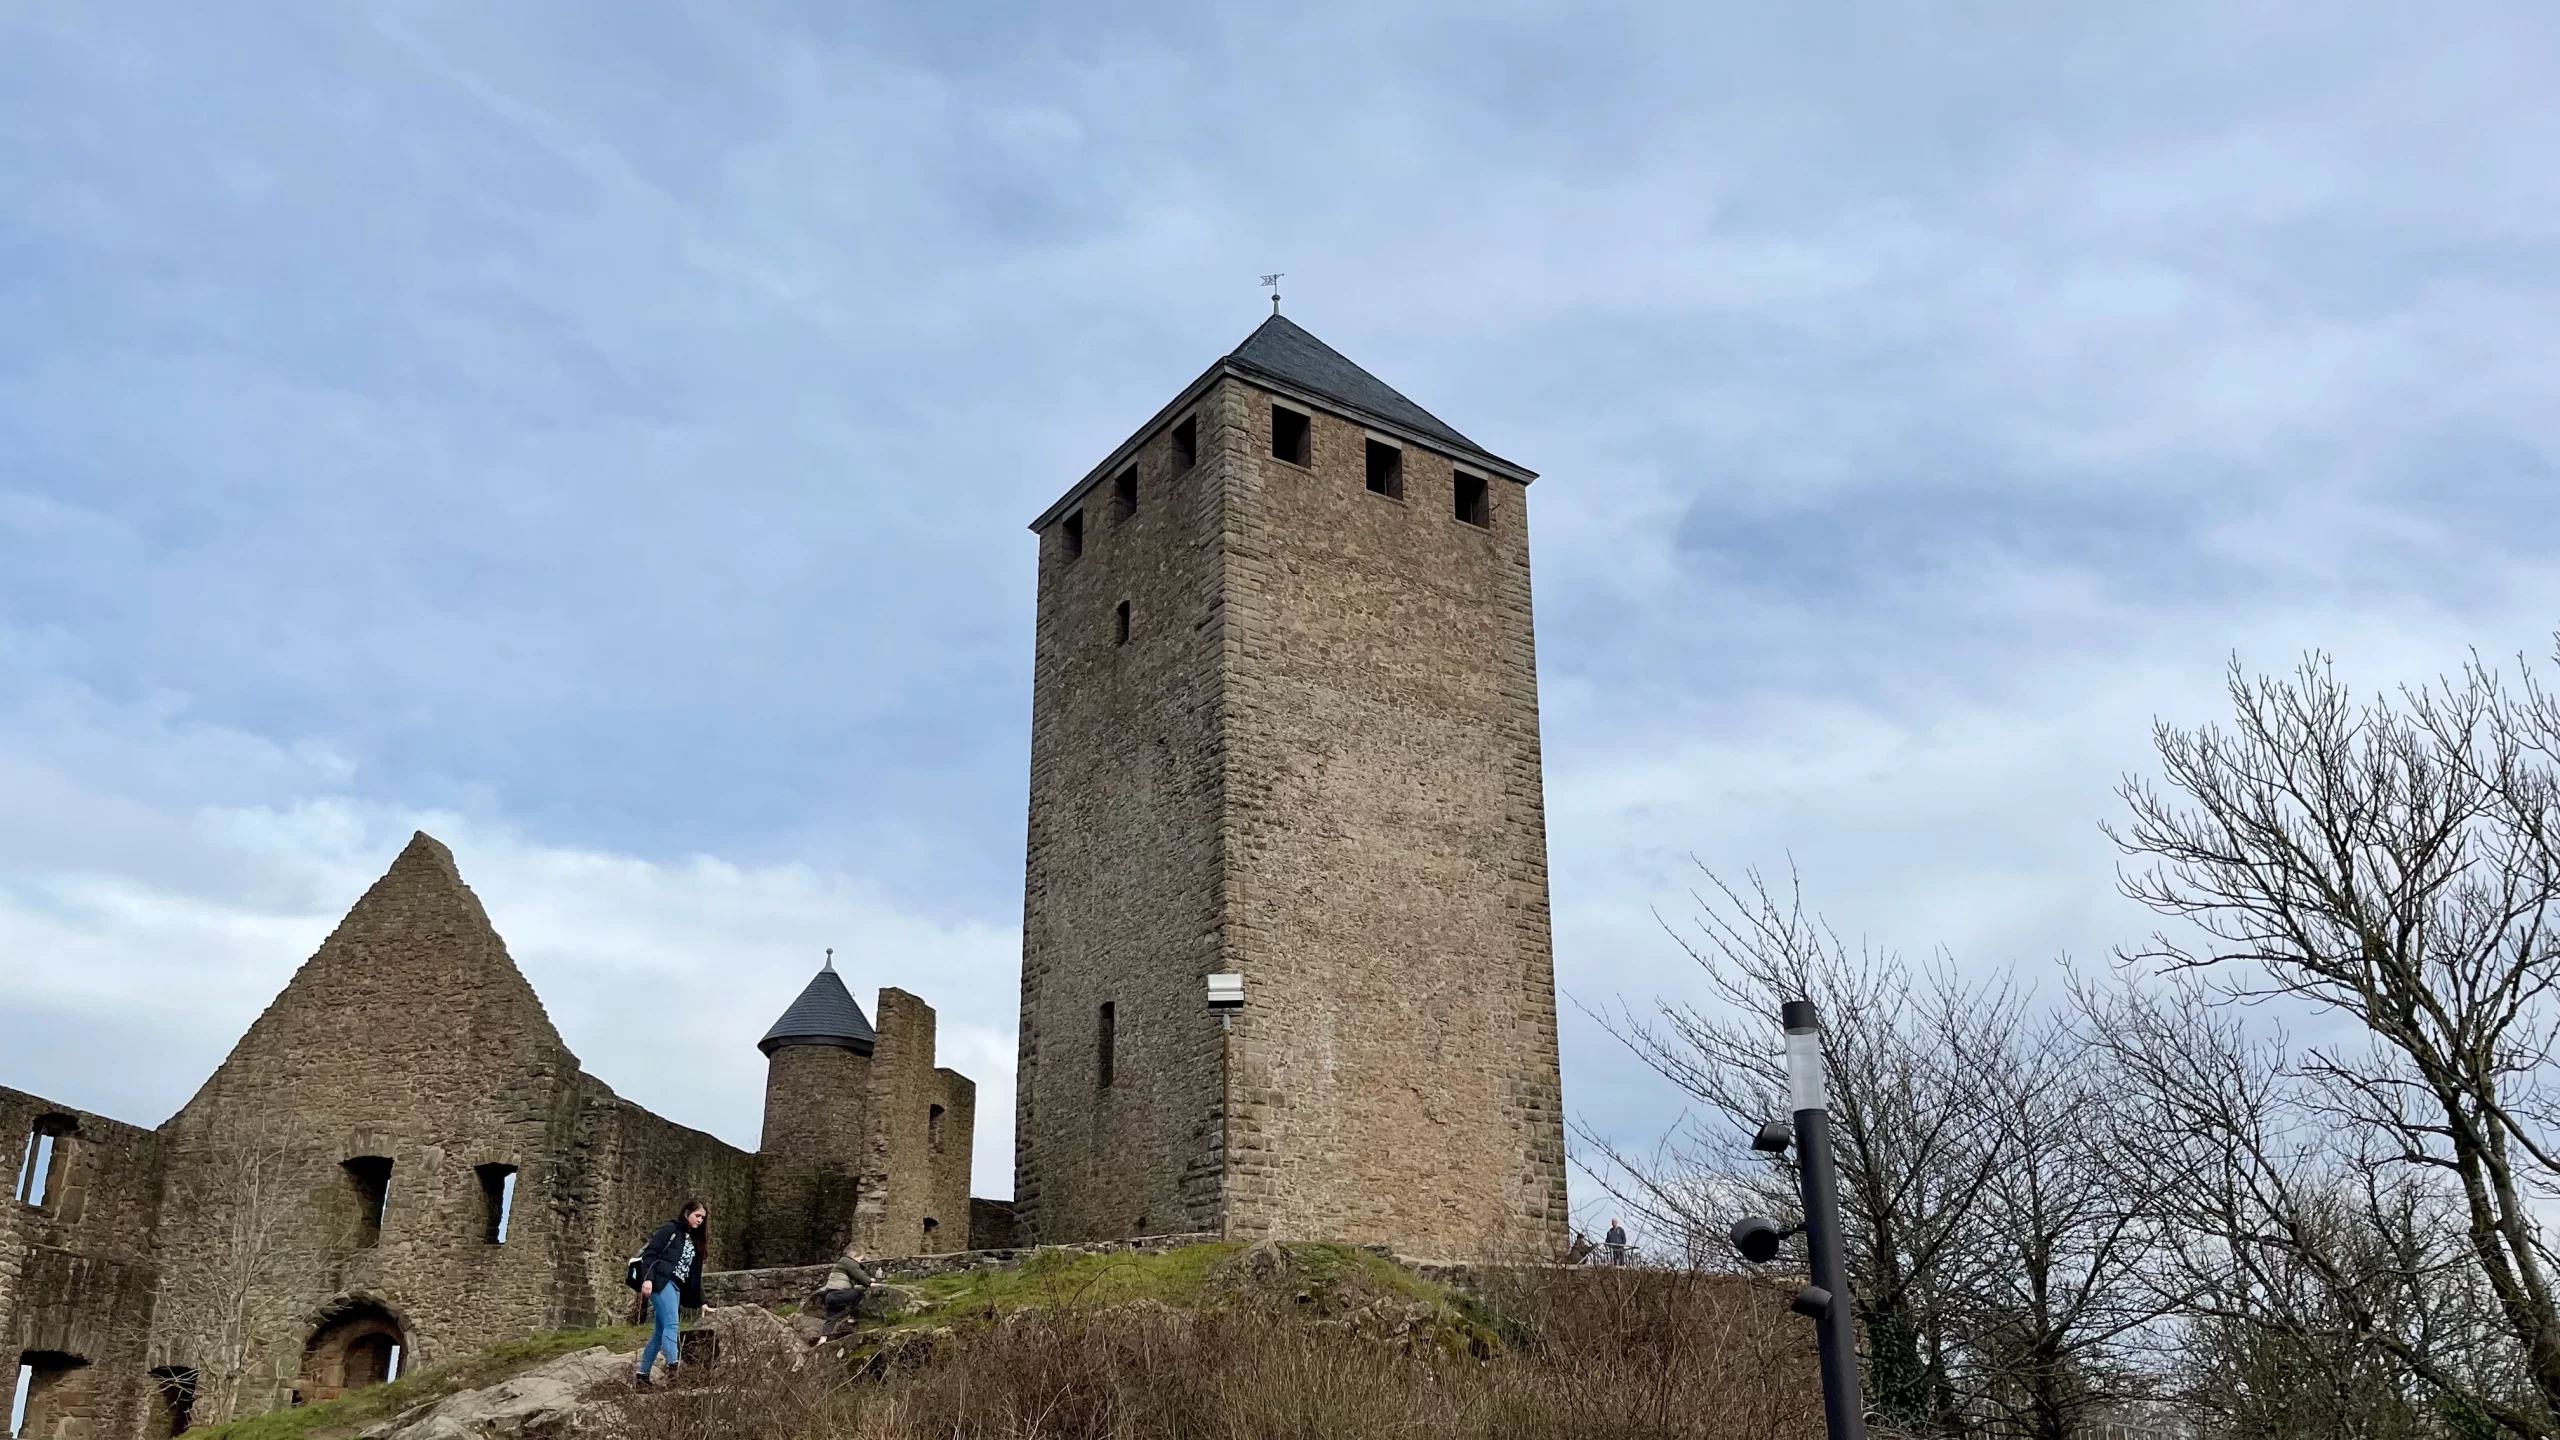 a stone tower with 2 windows near the top of Lichtenberg castle in Germany